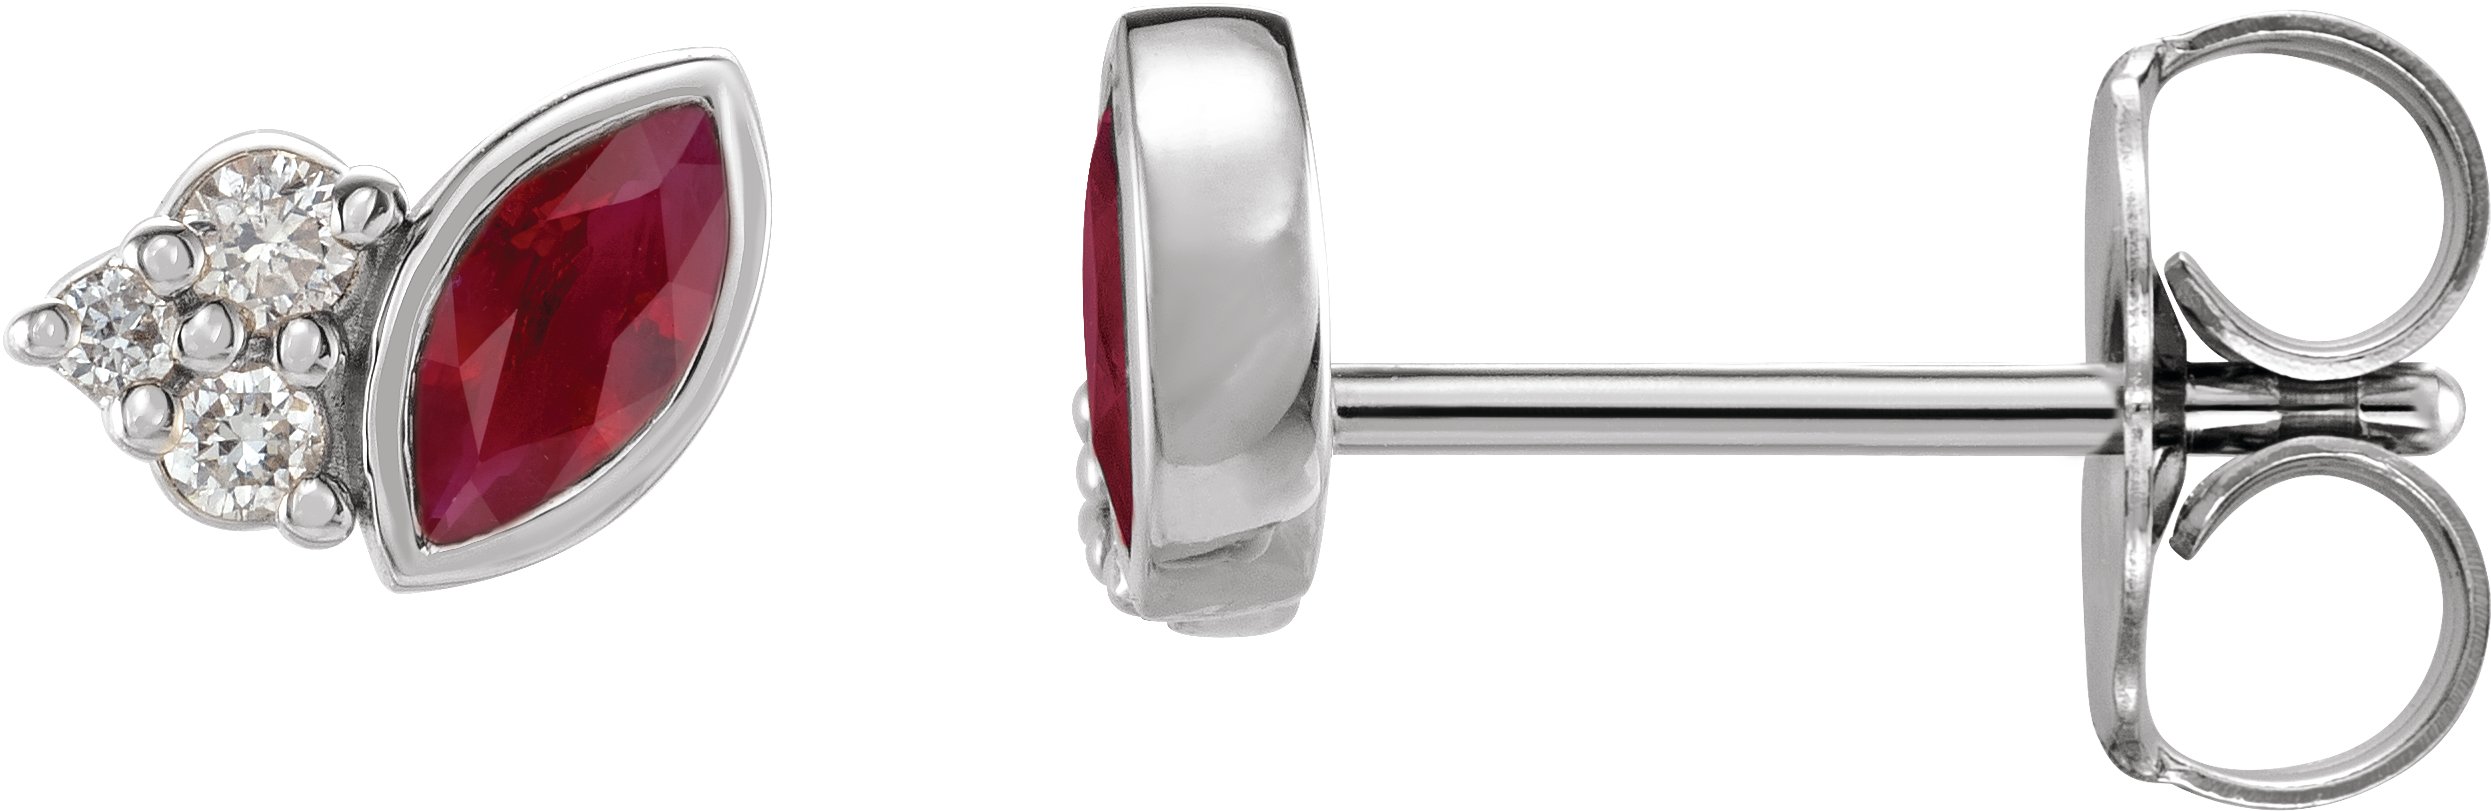 Platinum Chatham Lab Created Ruby and .05 CTW Diamond Earrings Ref. 16501422